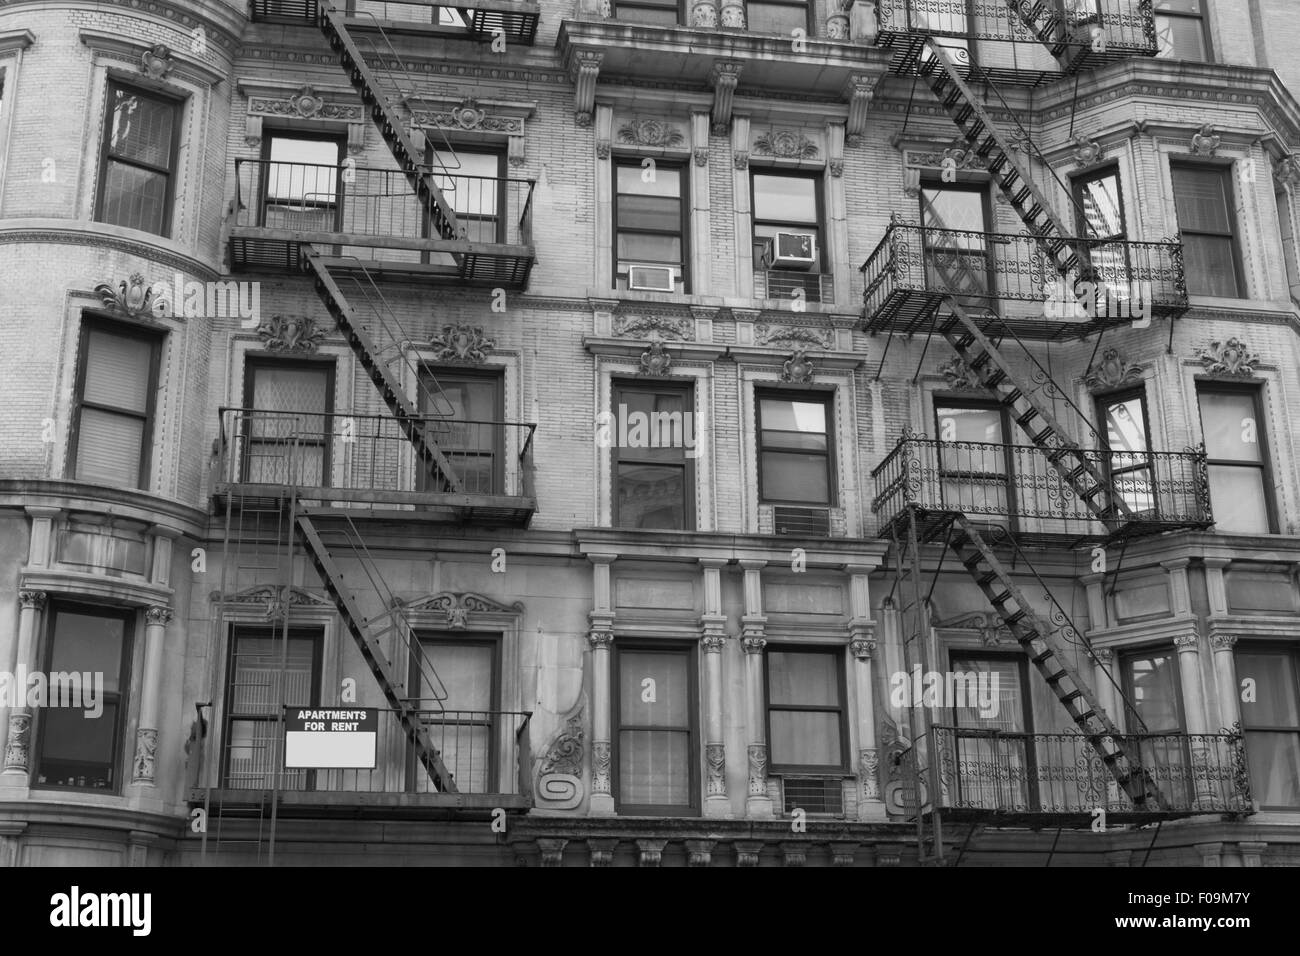 Characteristic fire escape that can be found in many areas of NYC Stock Photo